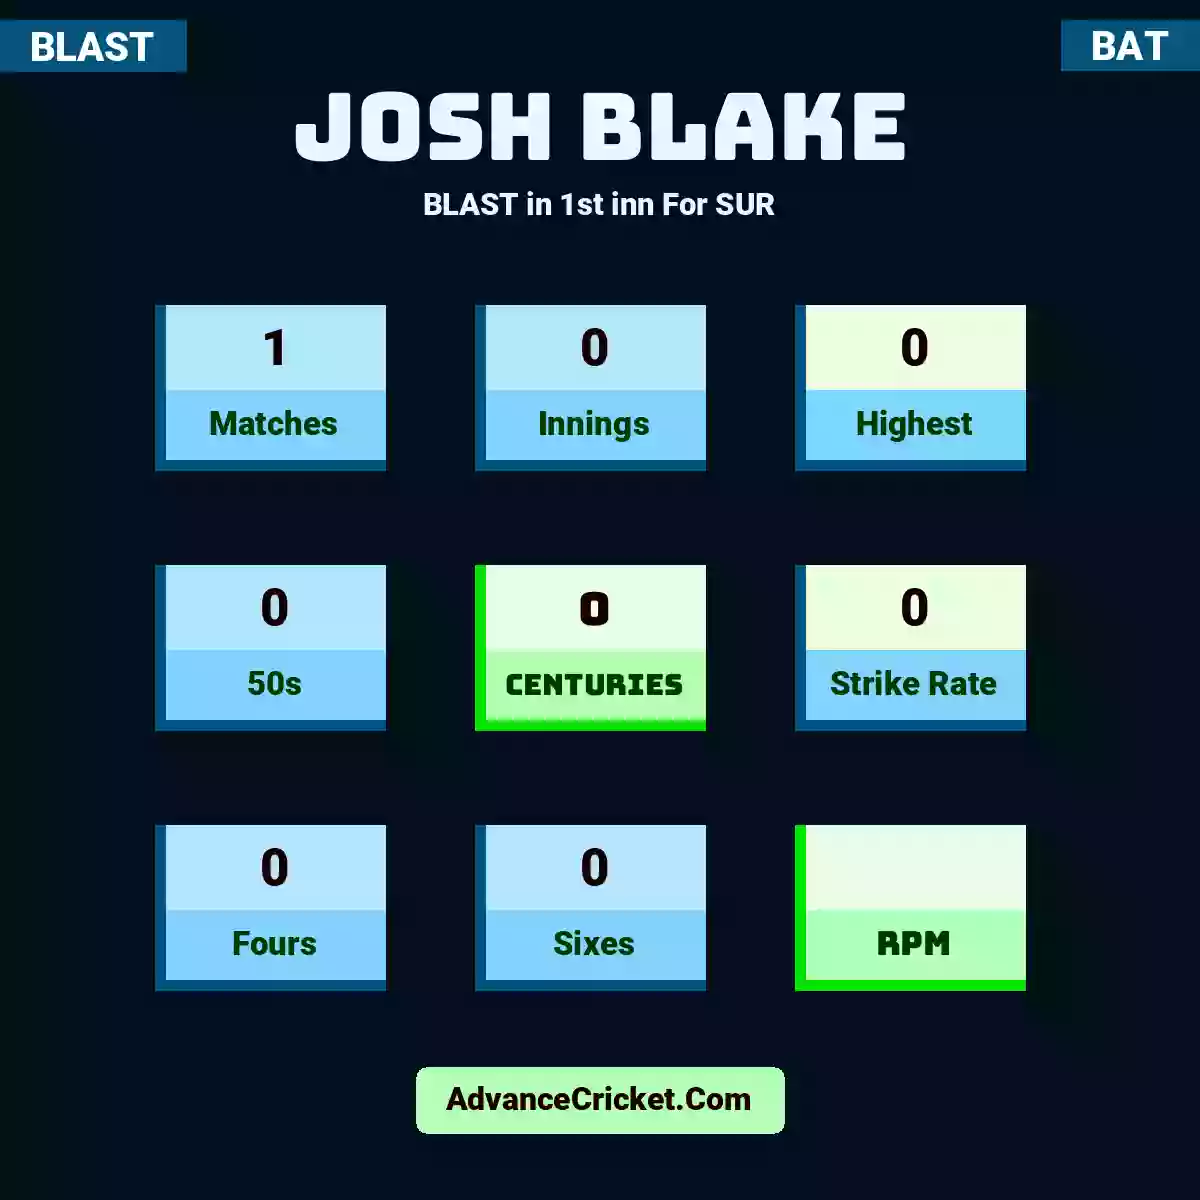 Josh Blake BLAST  in 1st inn For SUR, Josh Blake played 1 matches, scored 0 runs as highest, 0 half-centuries, and 0 centuries, with a strike rate of 0. J.Blake hit 0 fours and 0 sixes.